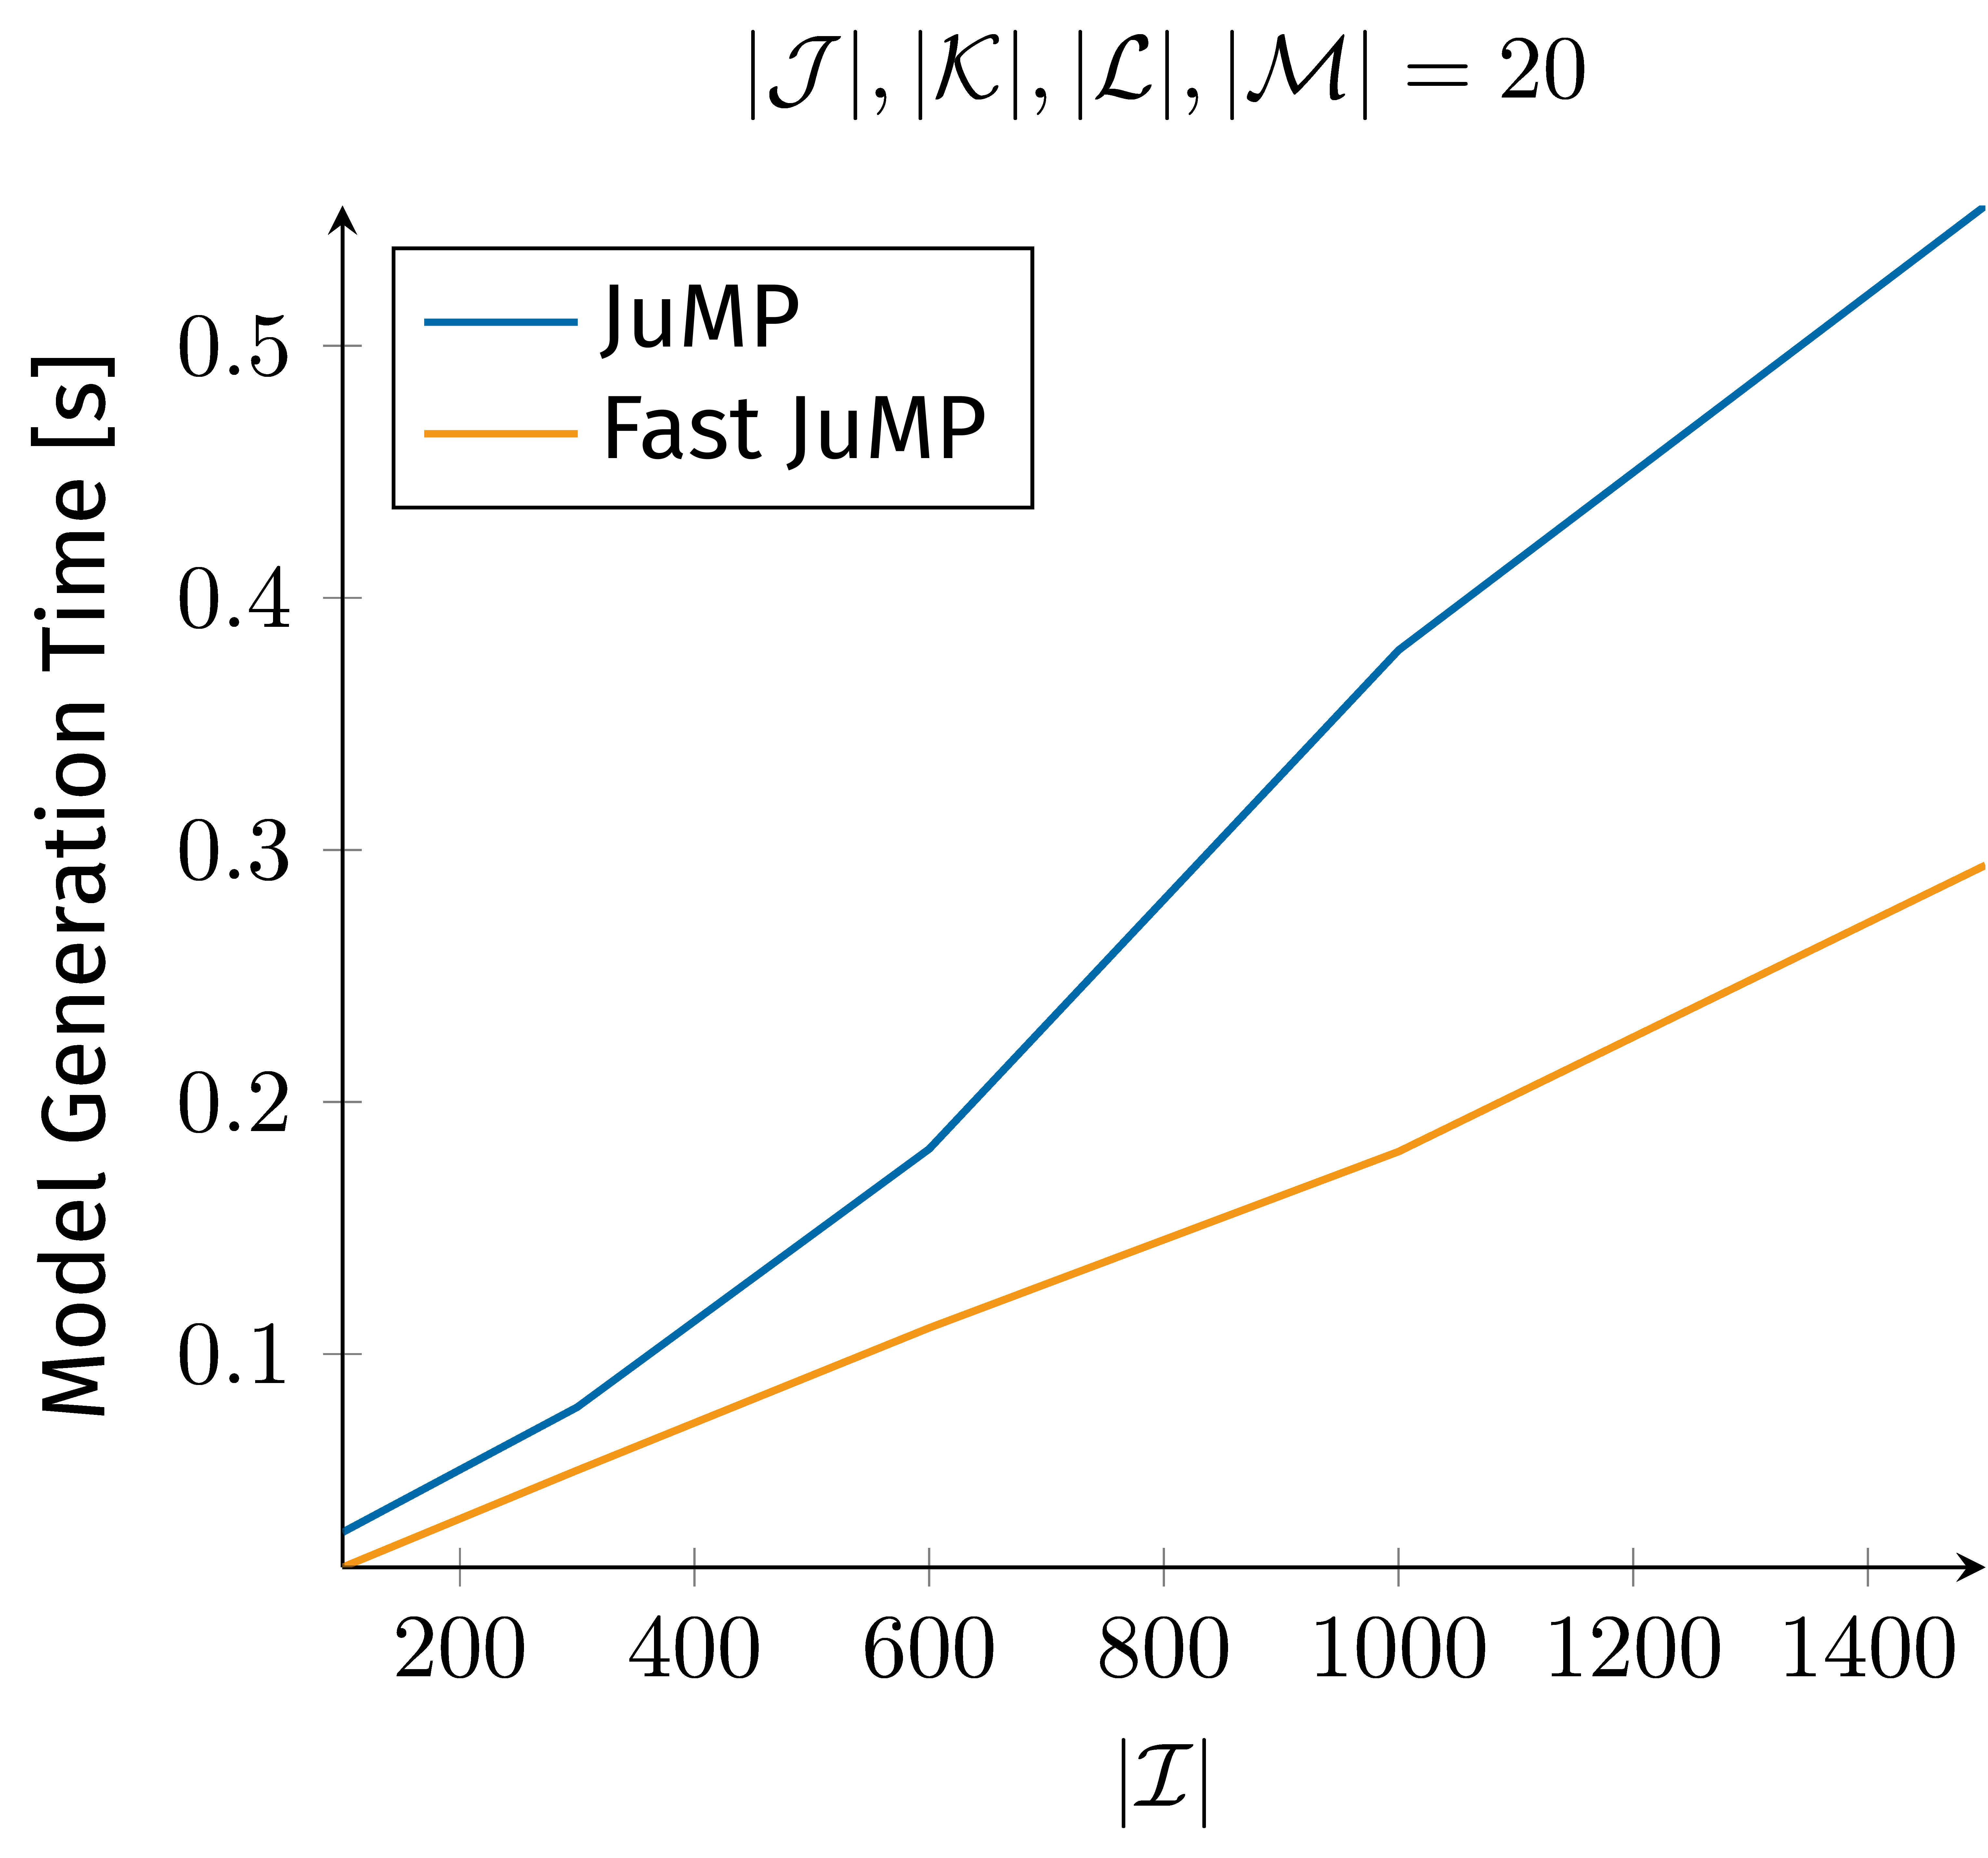 Figure 2. Compared model generation times for an low and high performing implementation in JuMP.